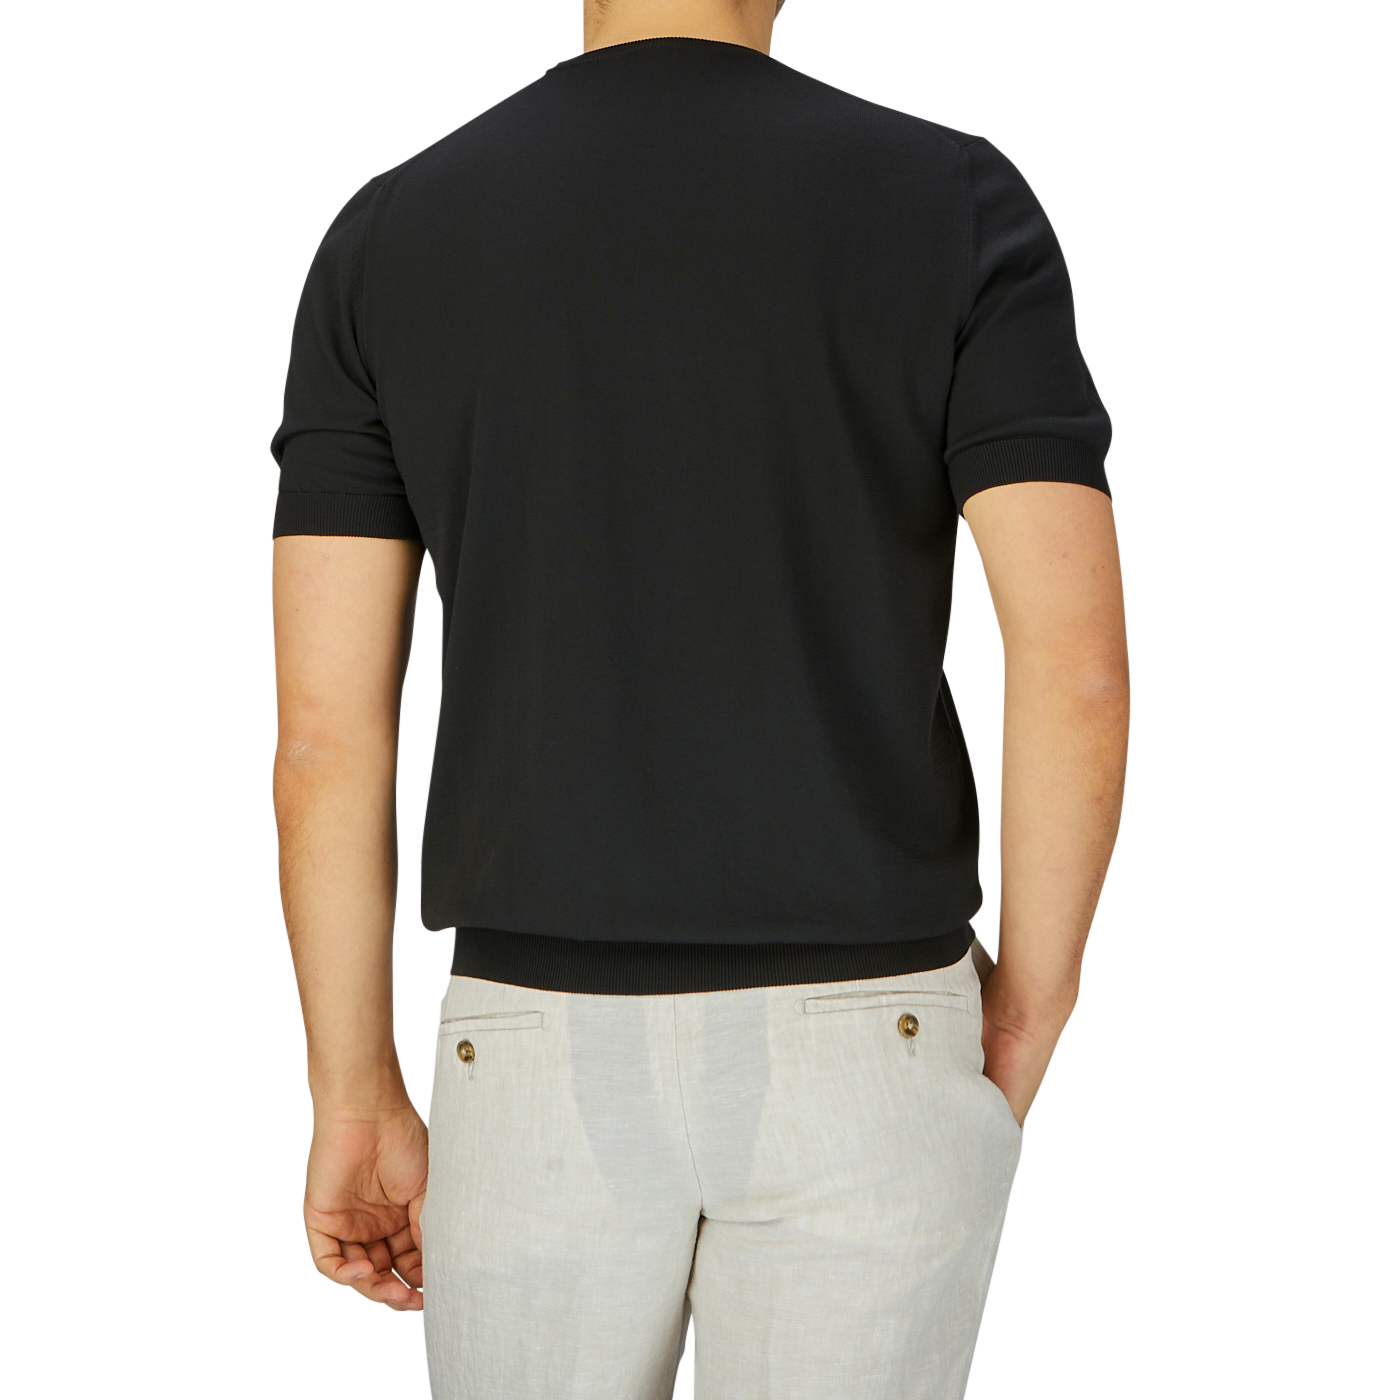 Rear view of a man in a Gran Sasso black organic cotton t-shirt and light beige pants against a grey backdrop.